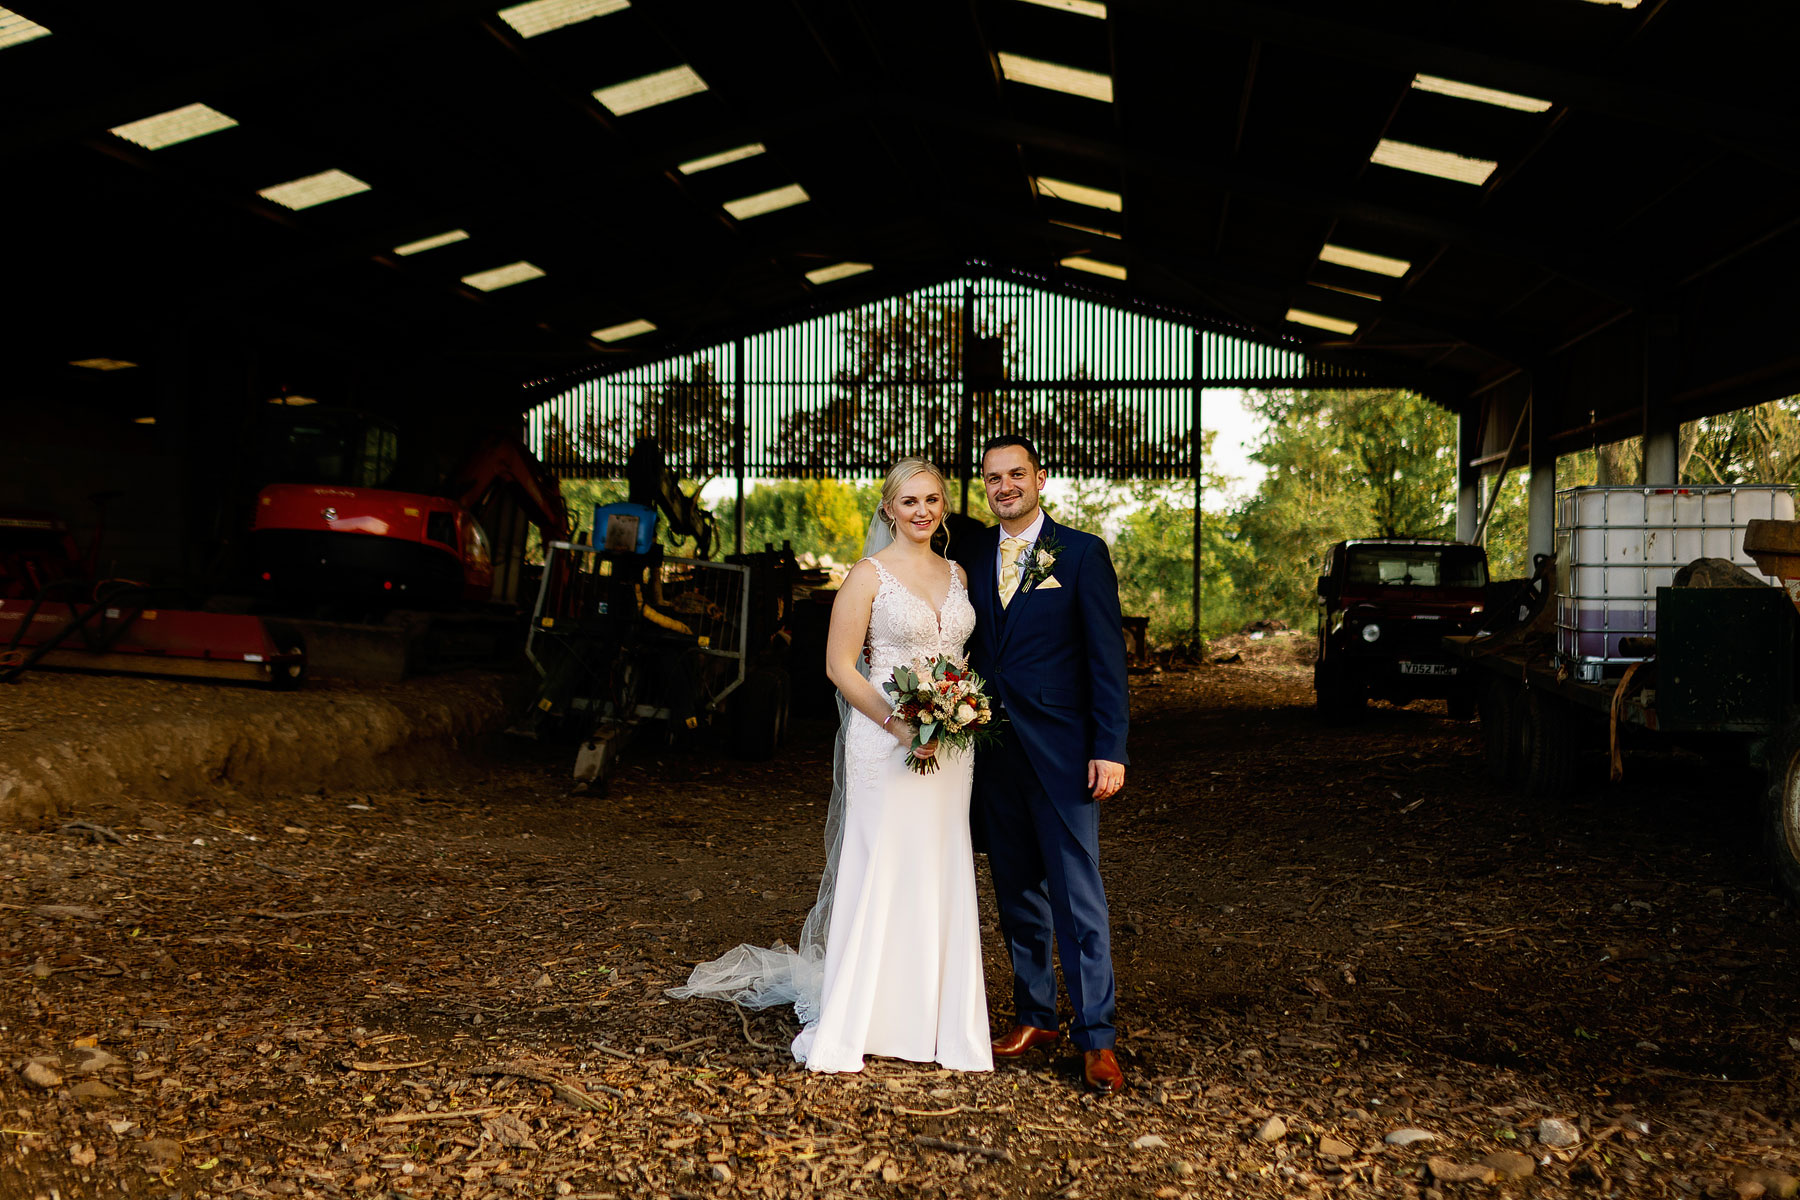 laid back wedding photographs at the outbarn